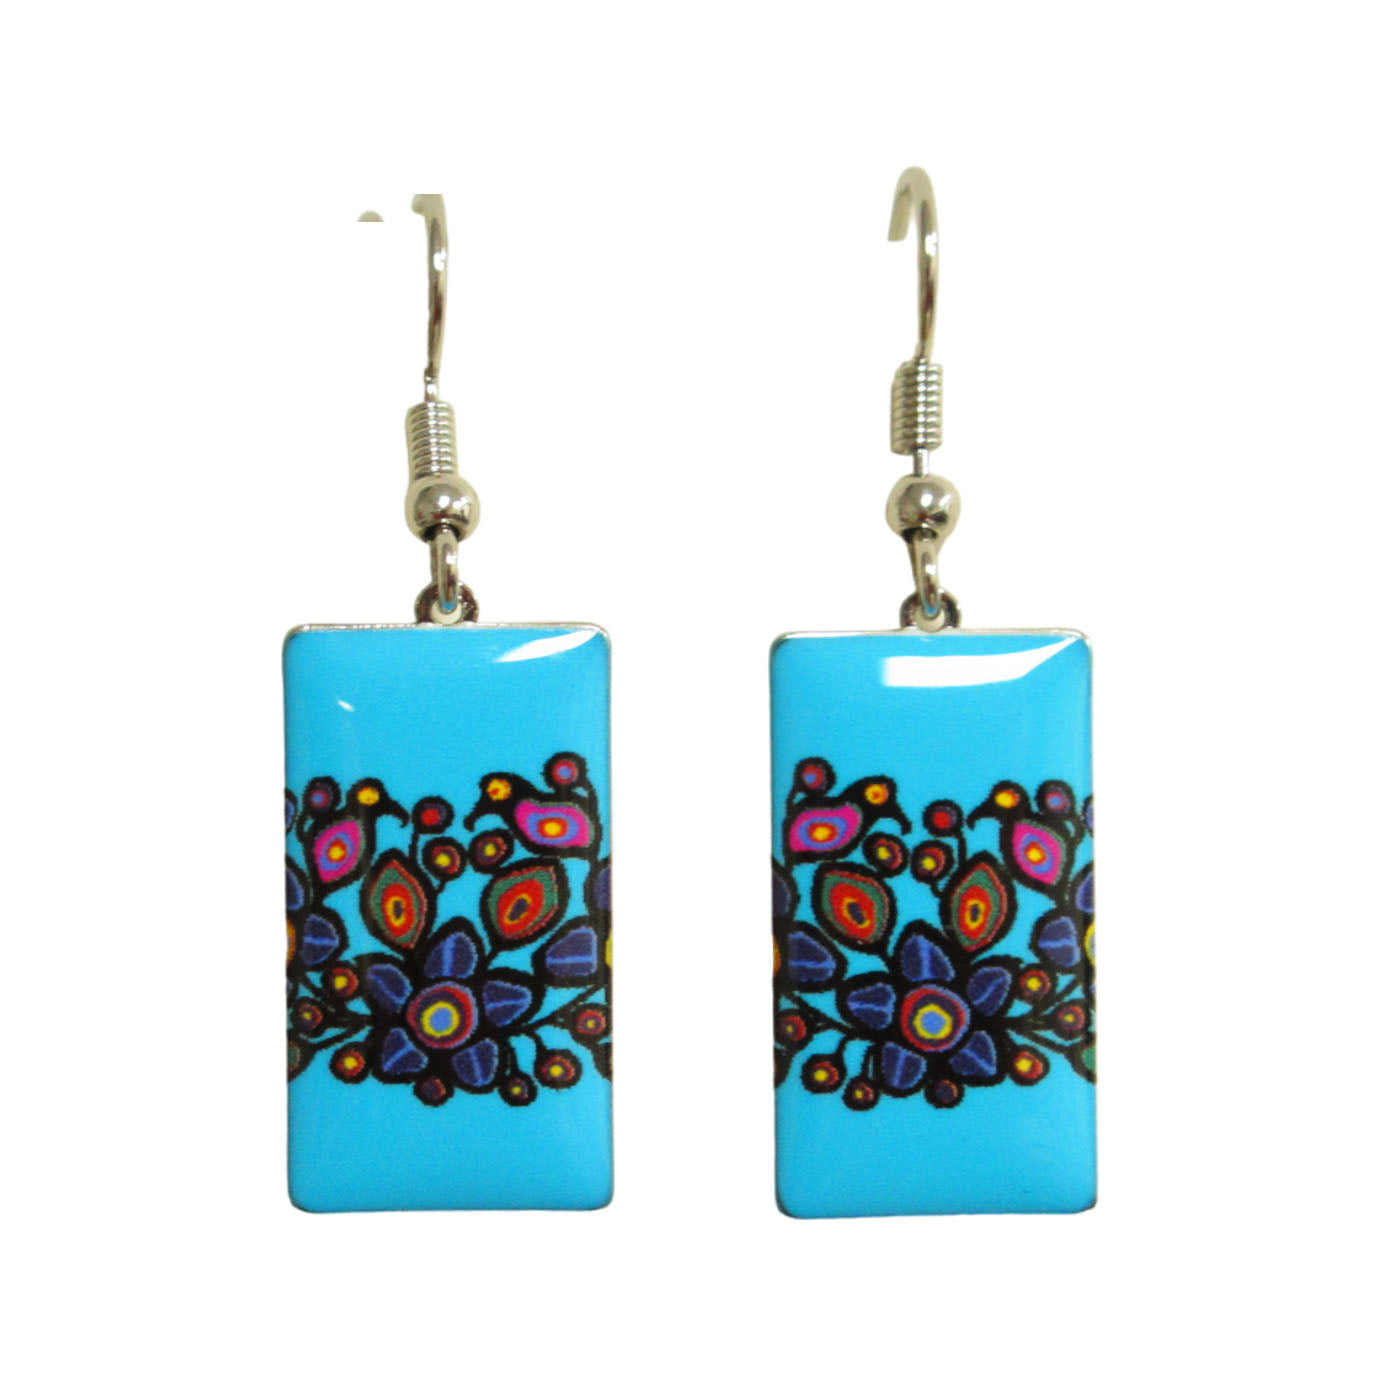 Norval Morrisseau Flowers and Birds Gallery Collection Earrings